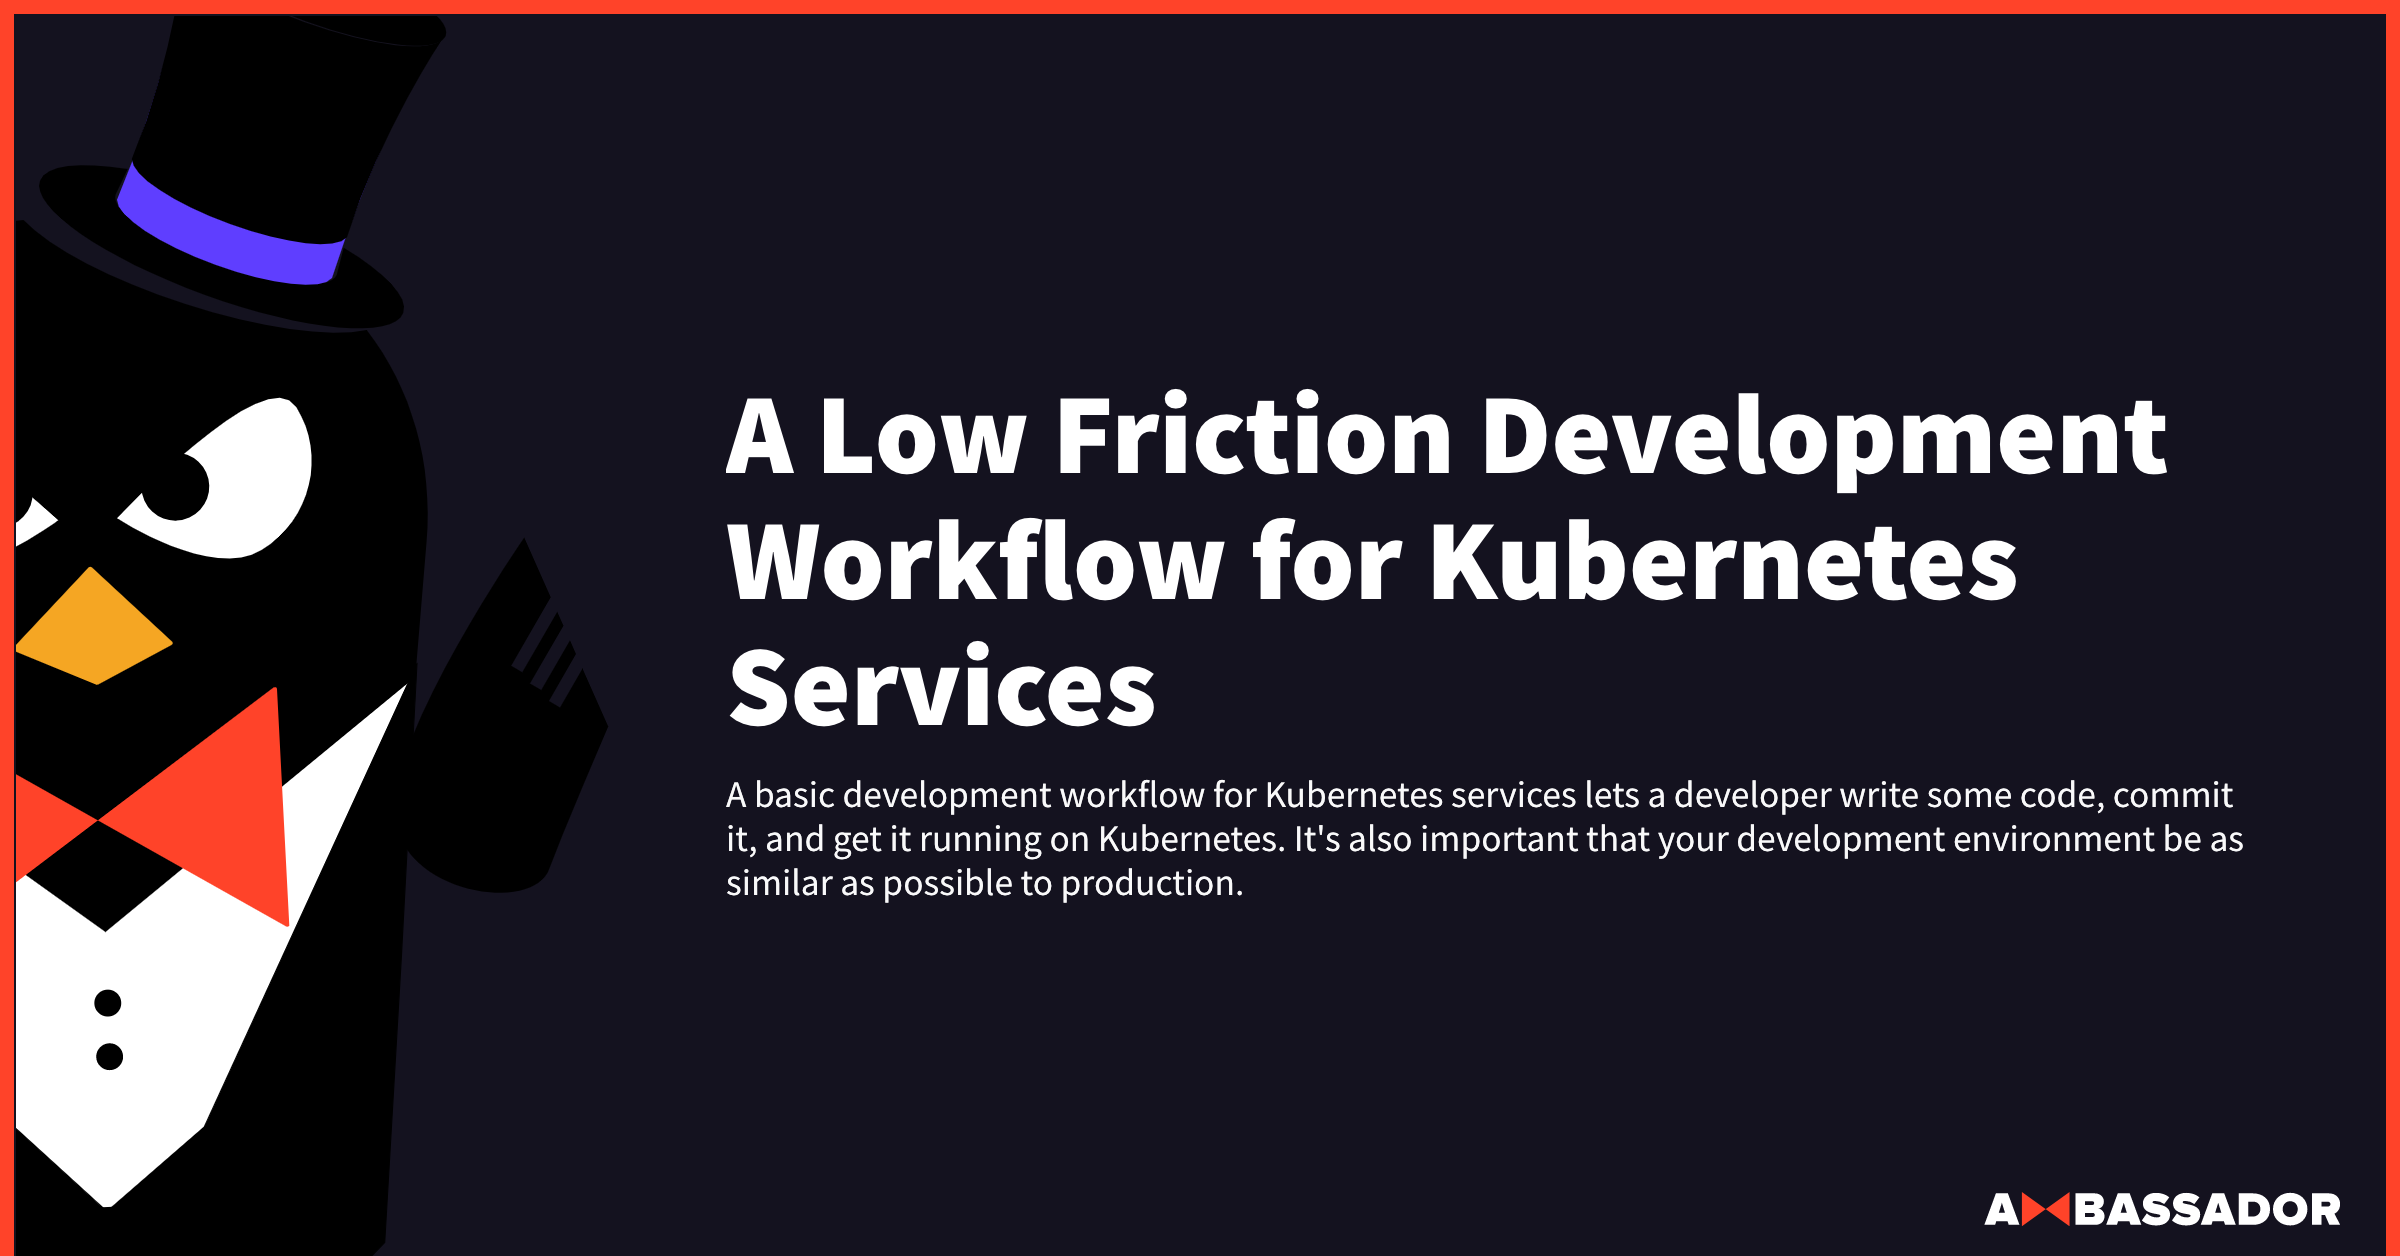 Thumbnail for resource: "A Low Friction Development Workflow for Kubernetes Services"